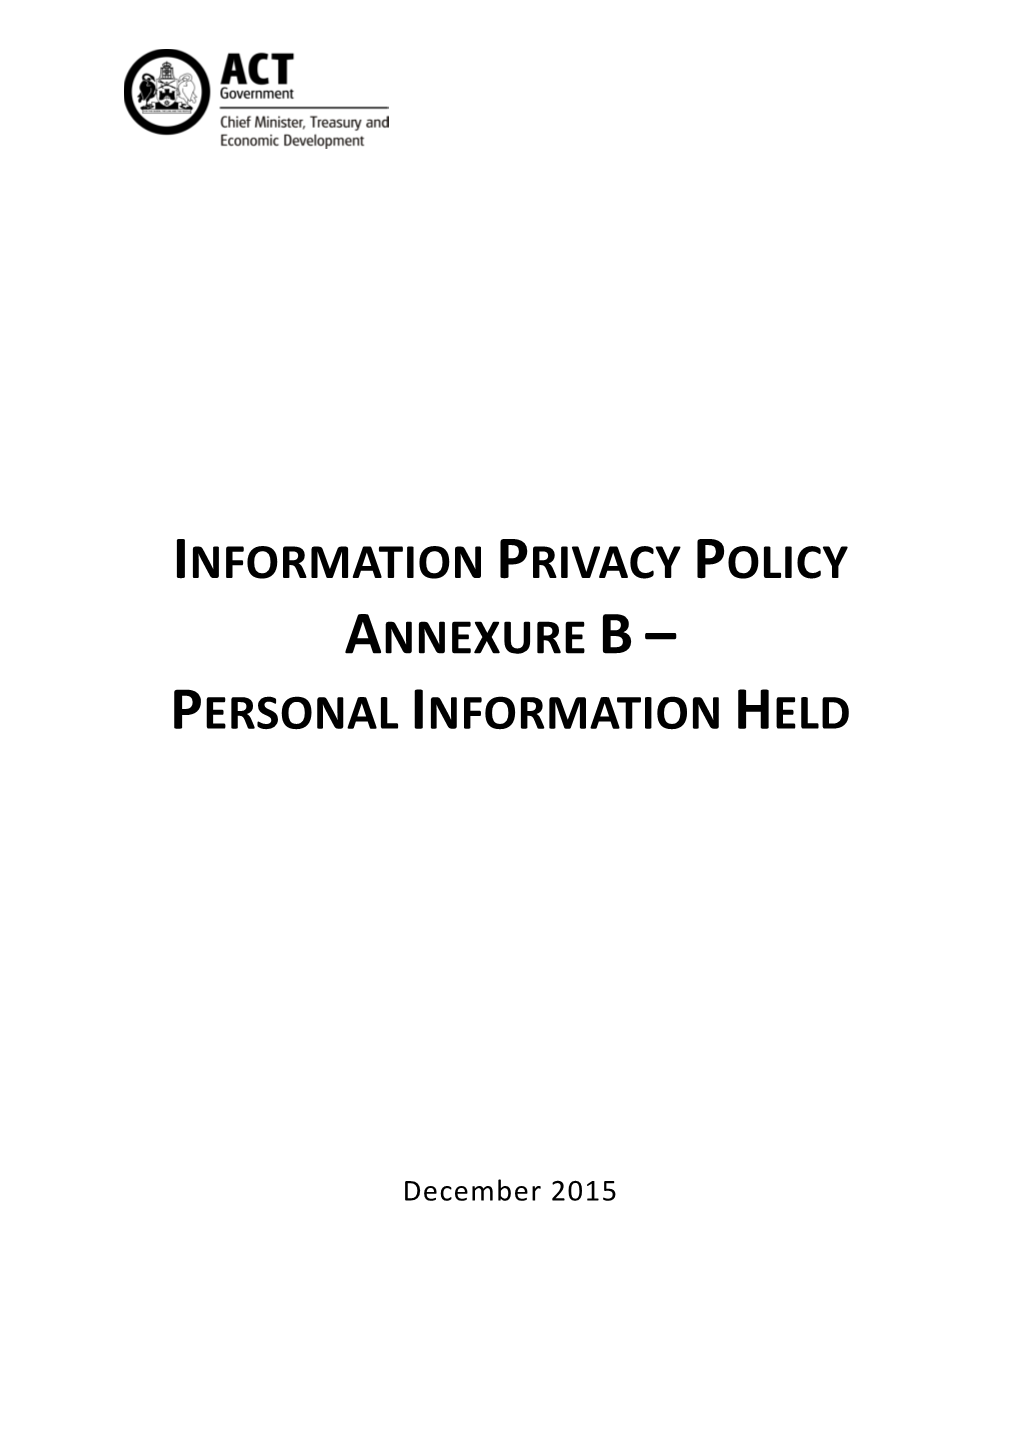 Information Privacy Policy Annexure B – Personal Information Held